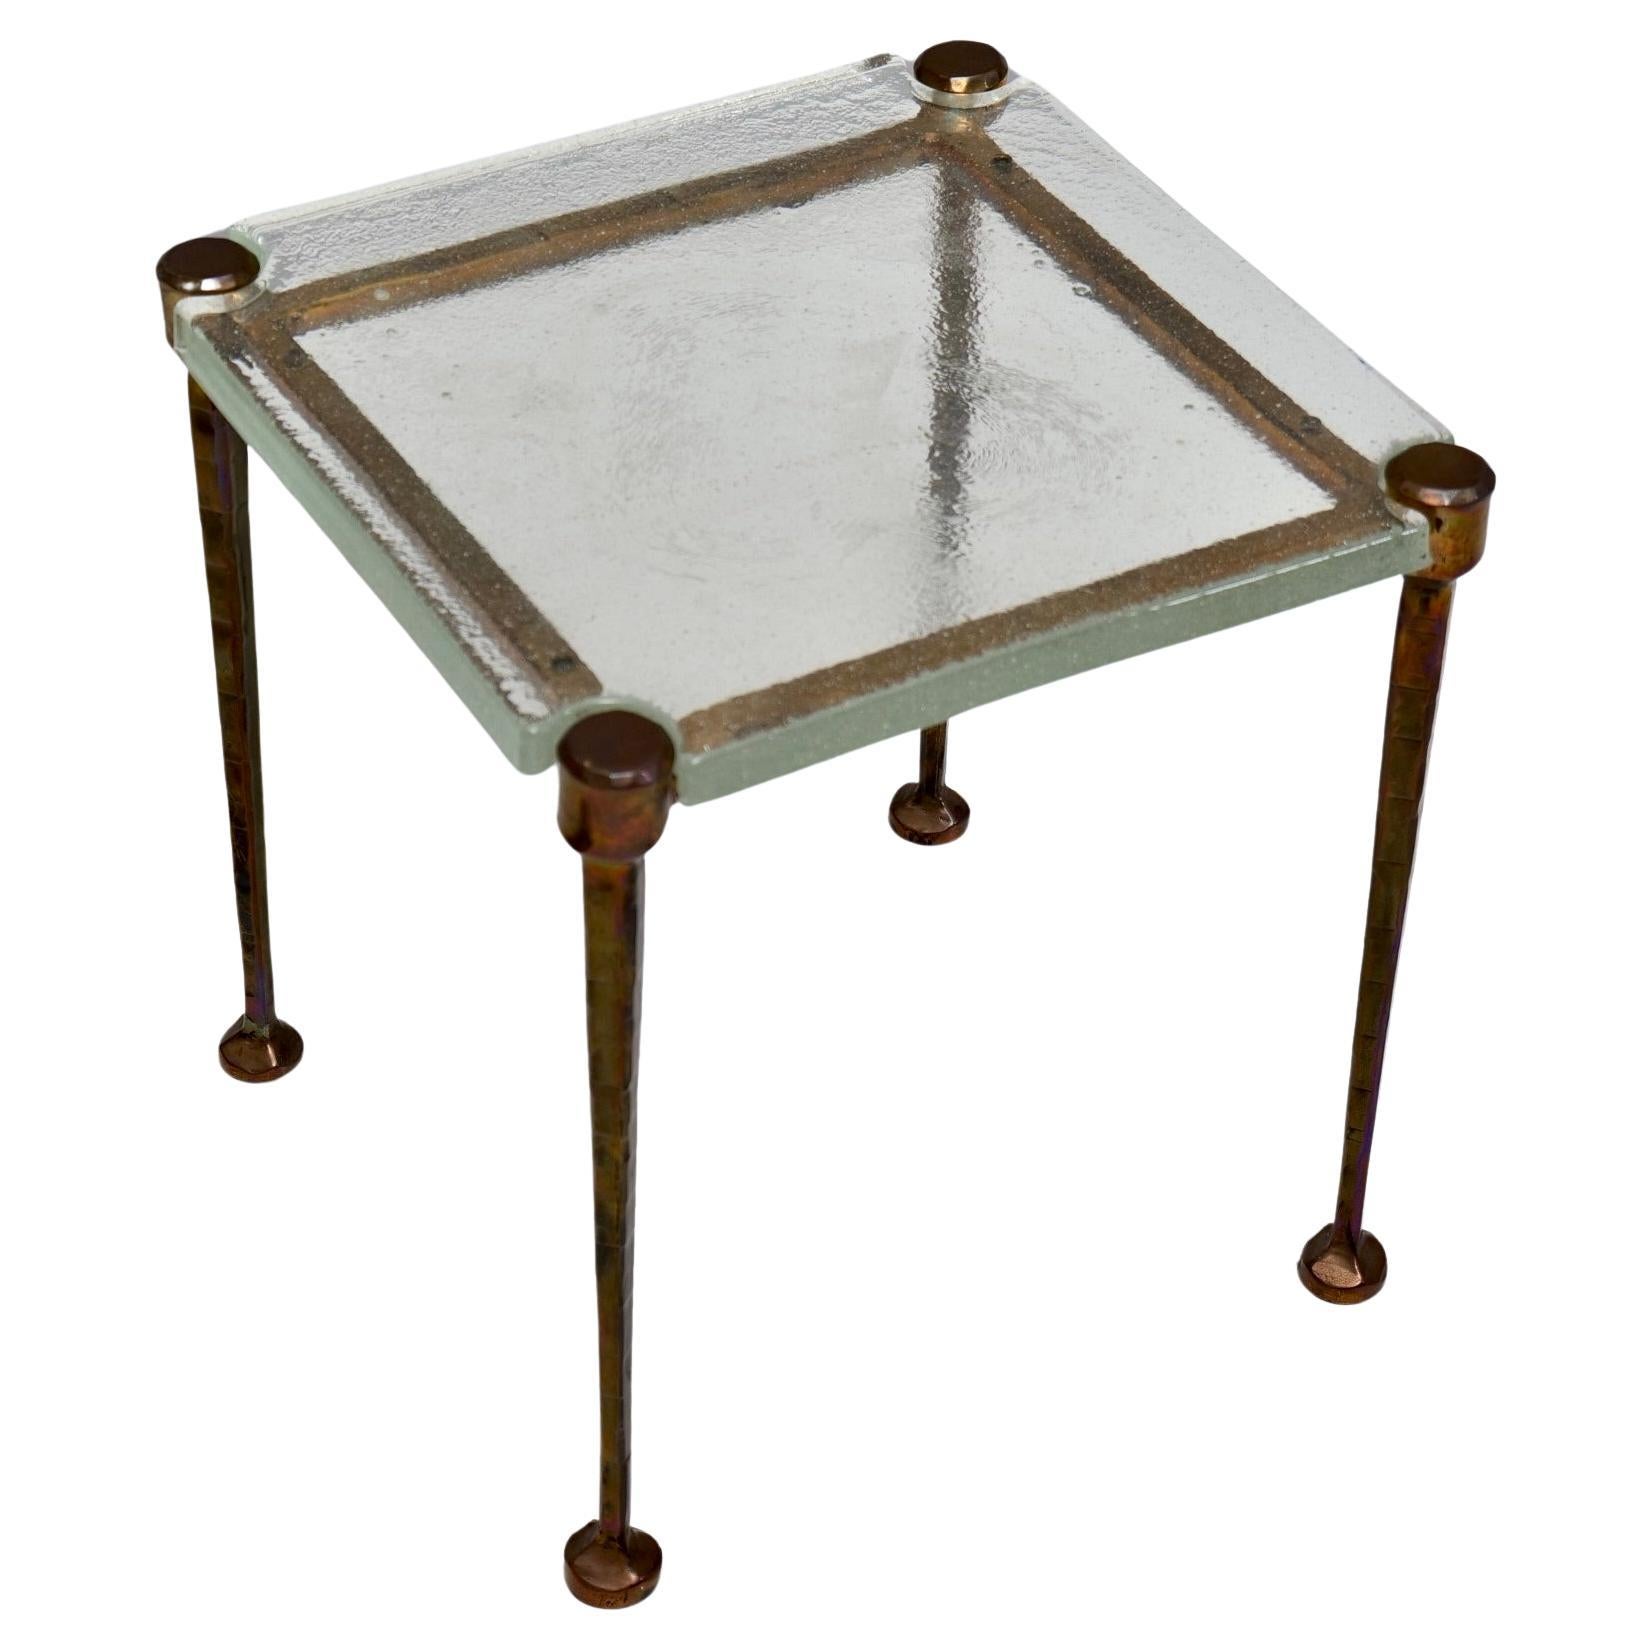 square forged bronze table with cast glass Lothar klute attr. - 1980s brutalist For Sale